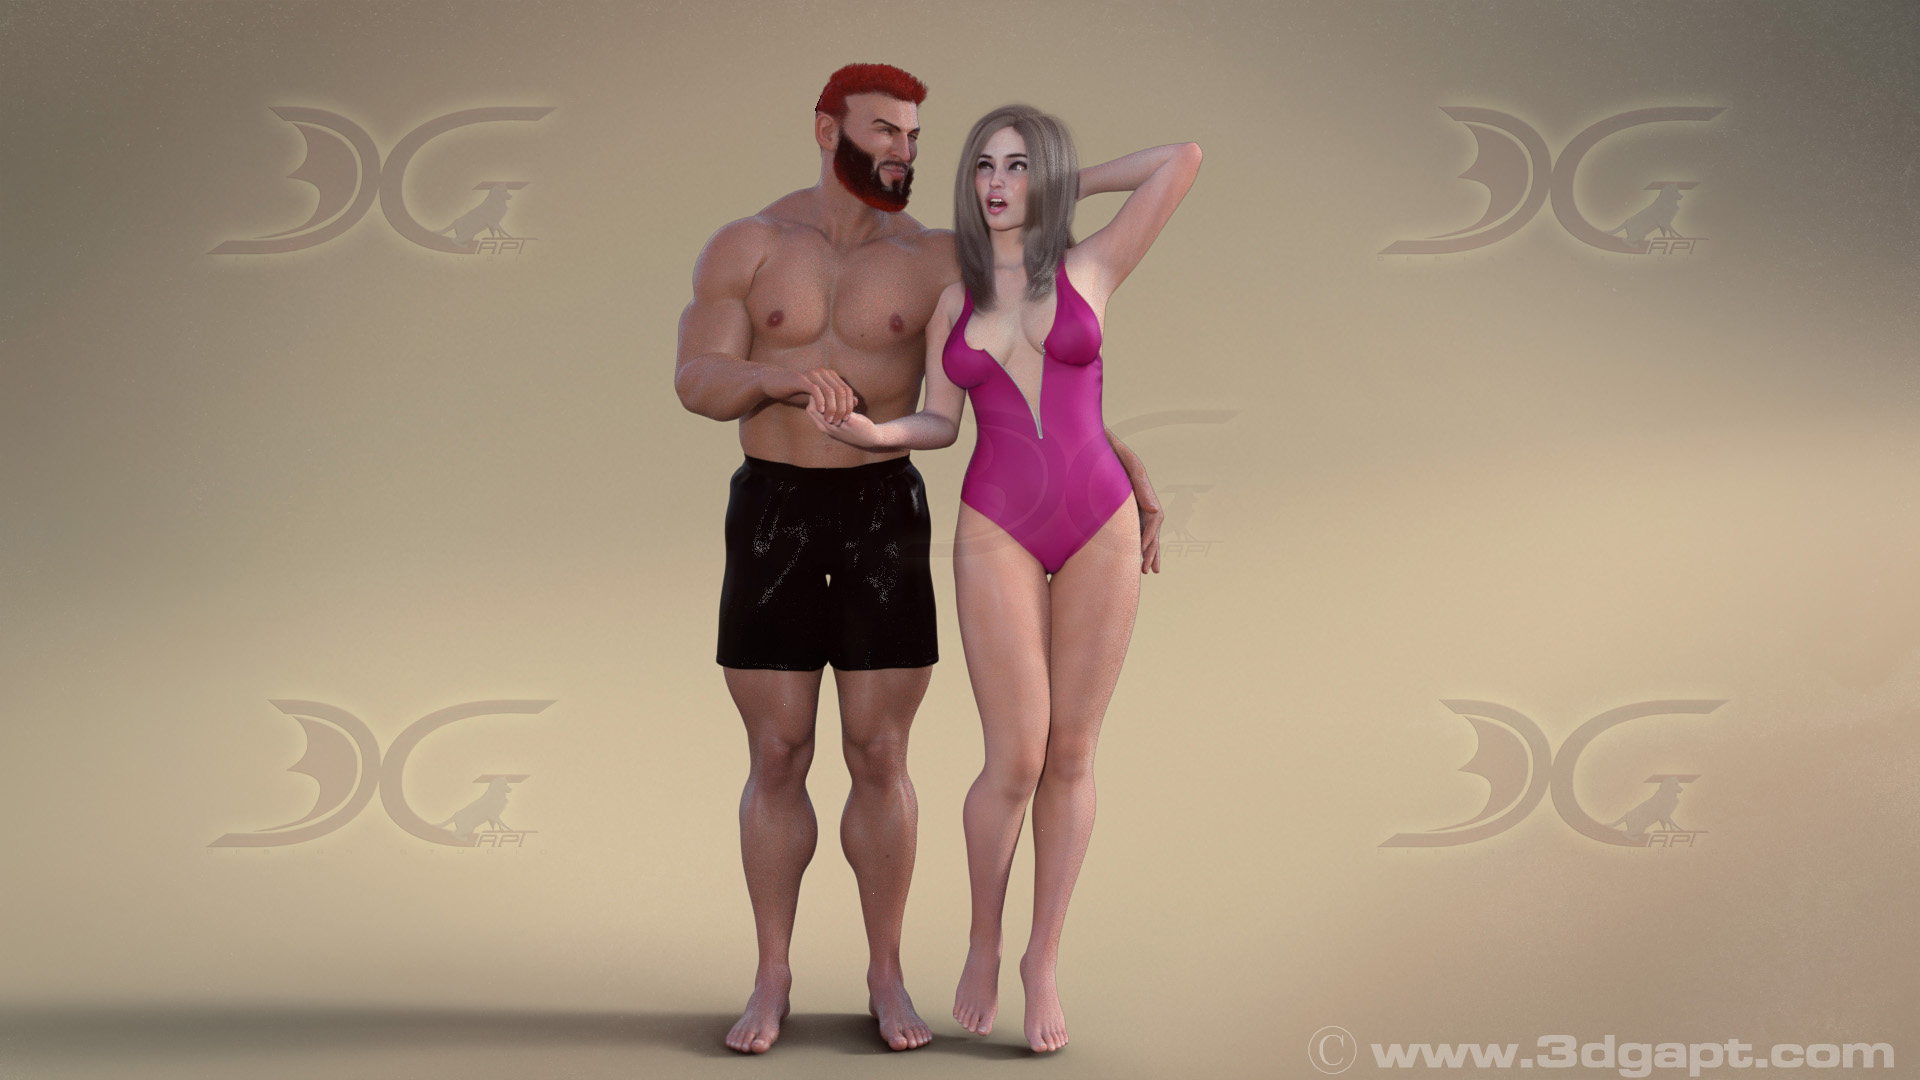 3d Characters man-woman images for book cover4